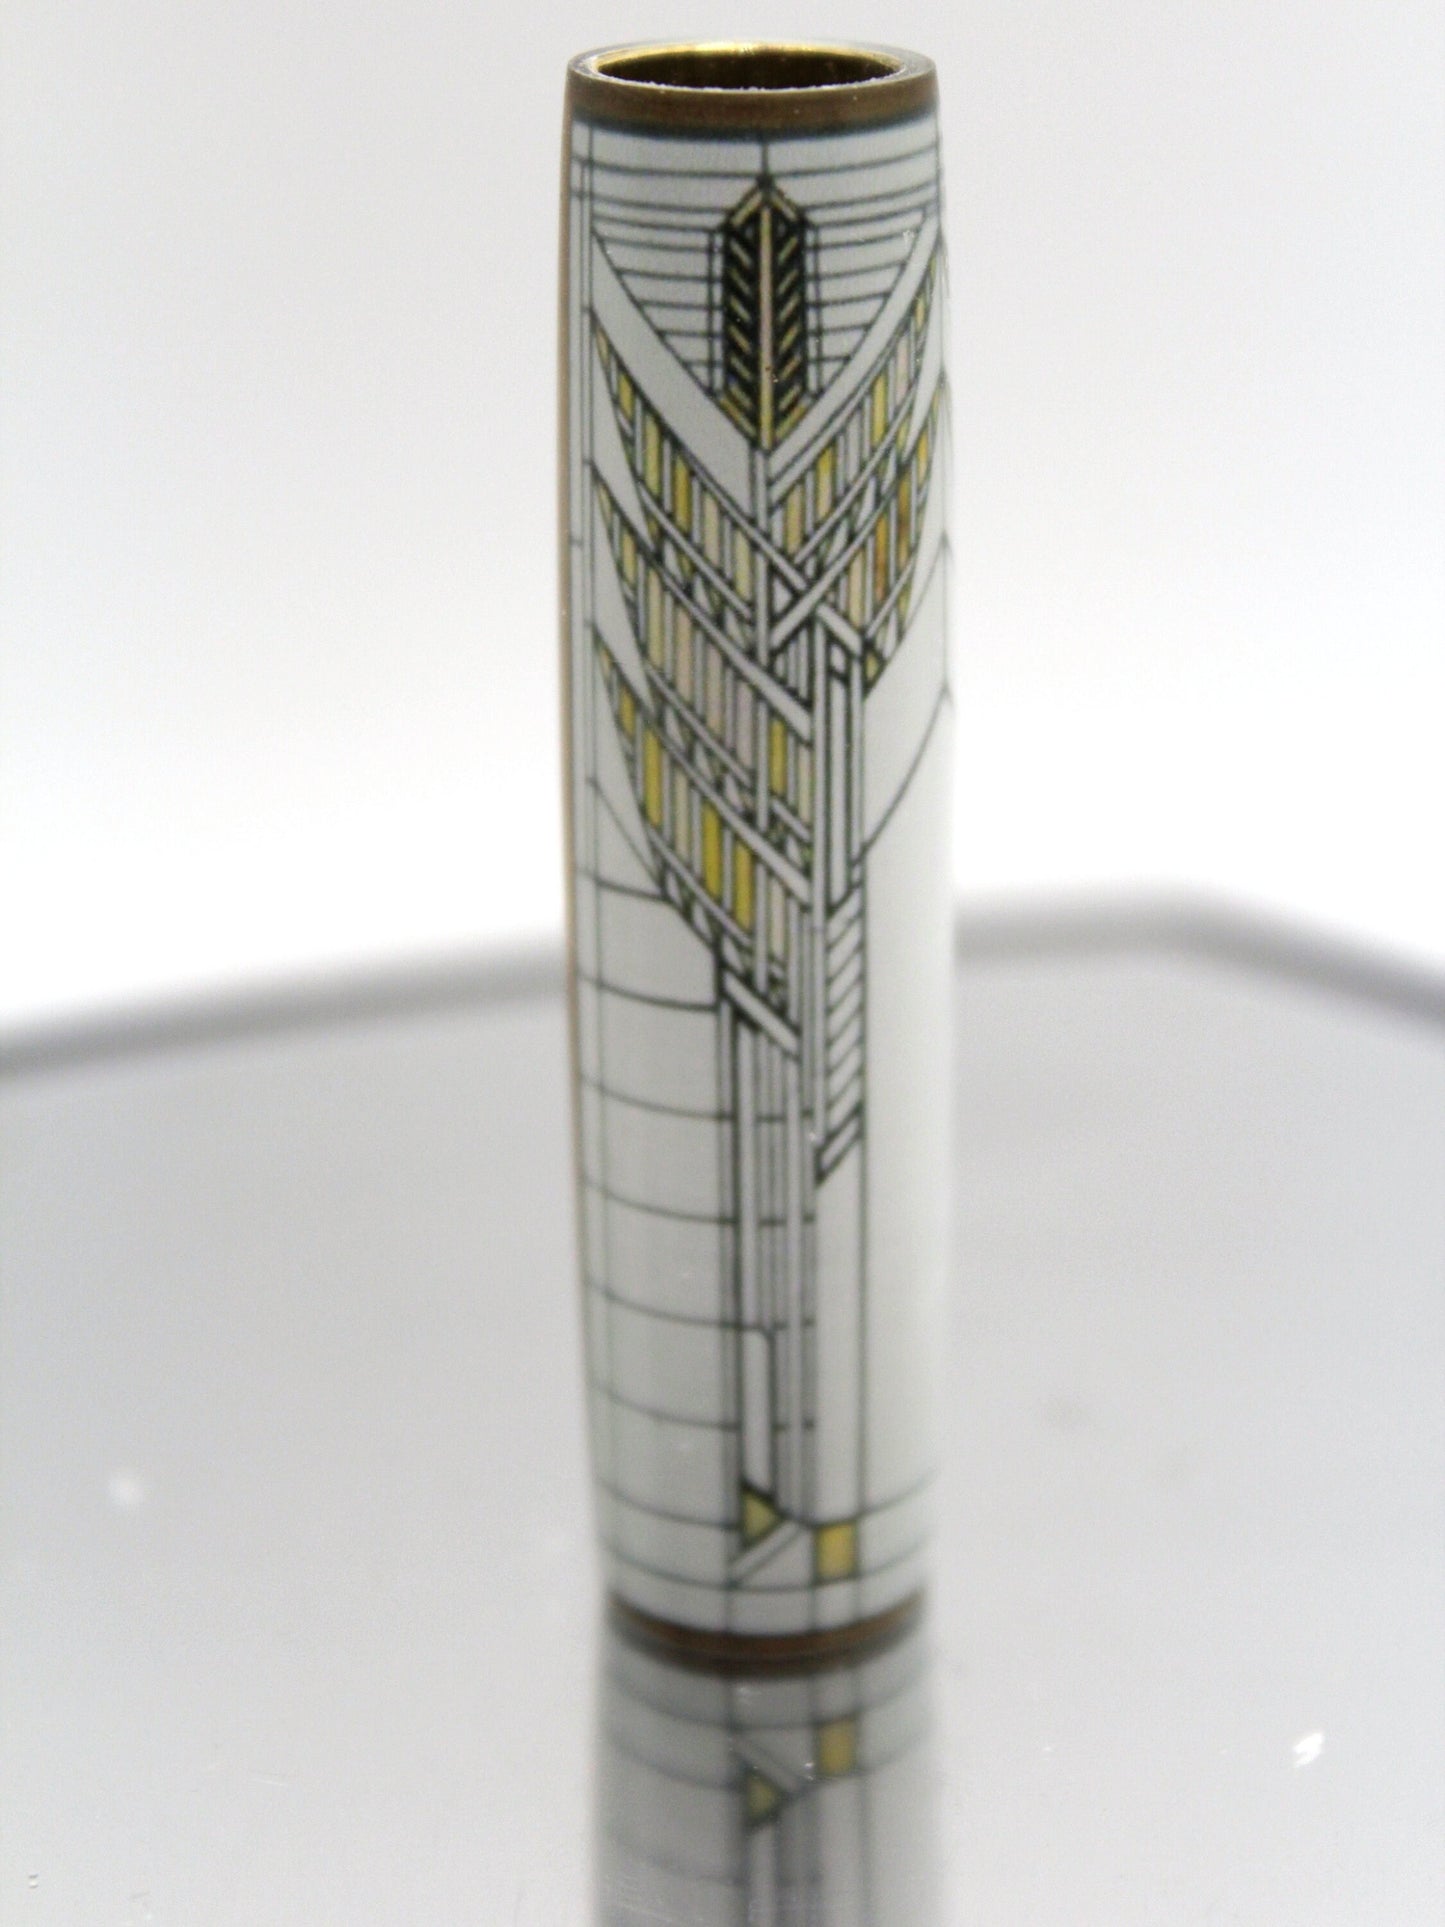 Frank Lloyd Wright - Sheaves of Wheat Stained Glass from Darwin D. Martin House Resin Cast Pen Blank for Classic Sierra Style Pen Kits